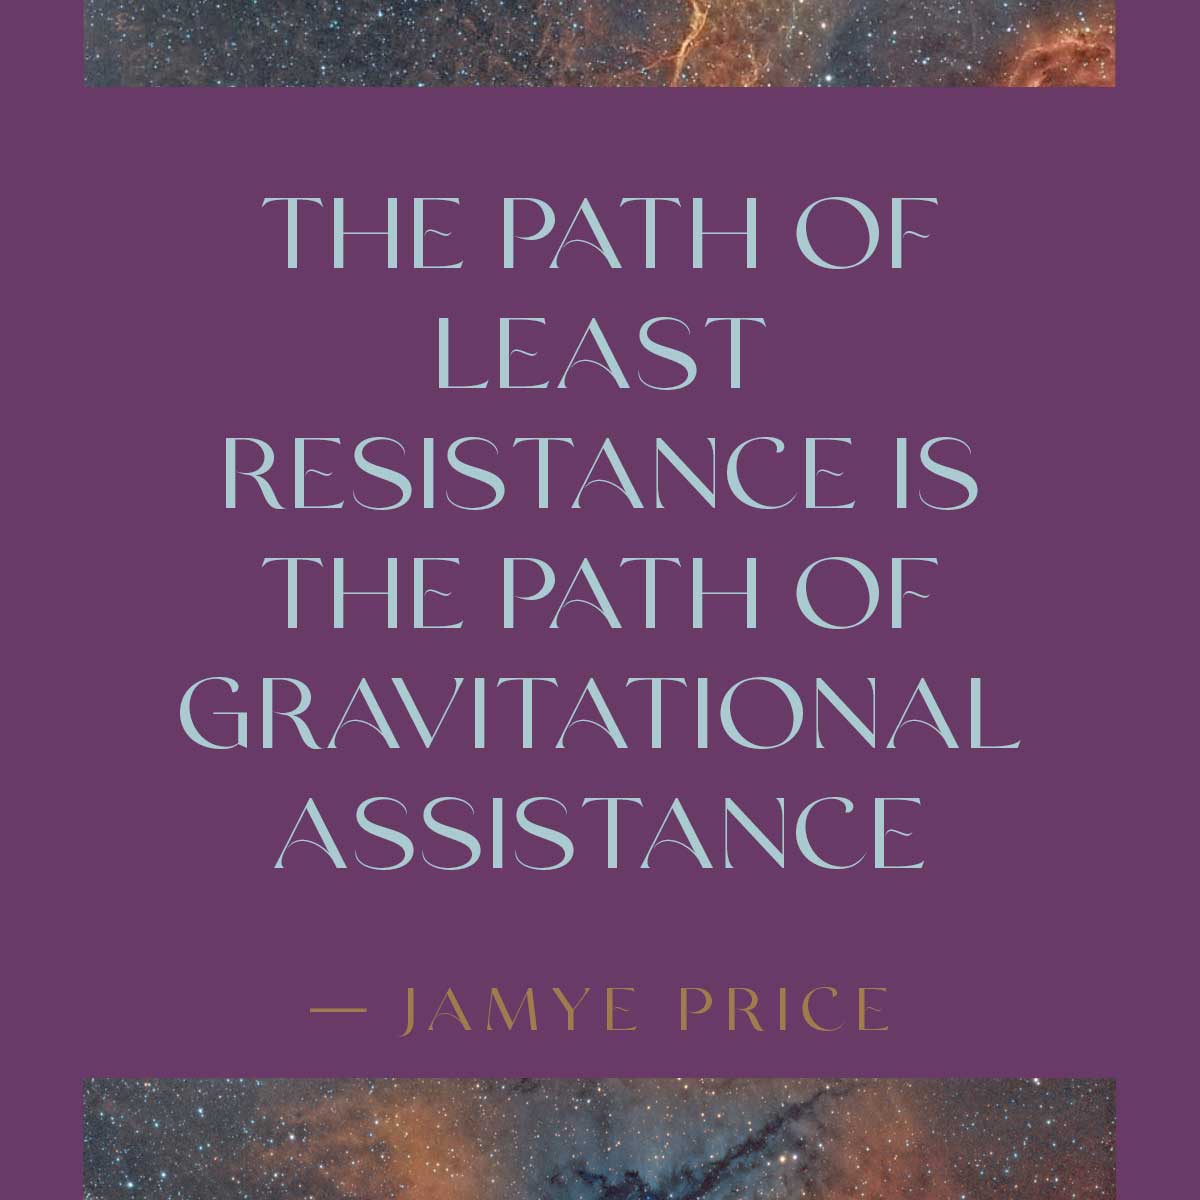 The path of least resistance is the path of gravitational assistance